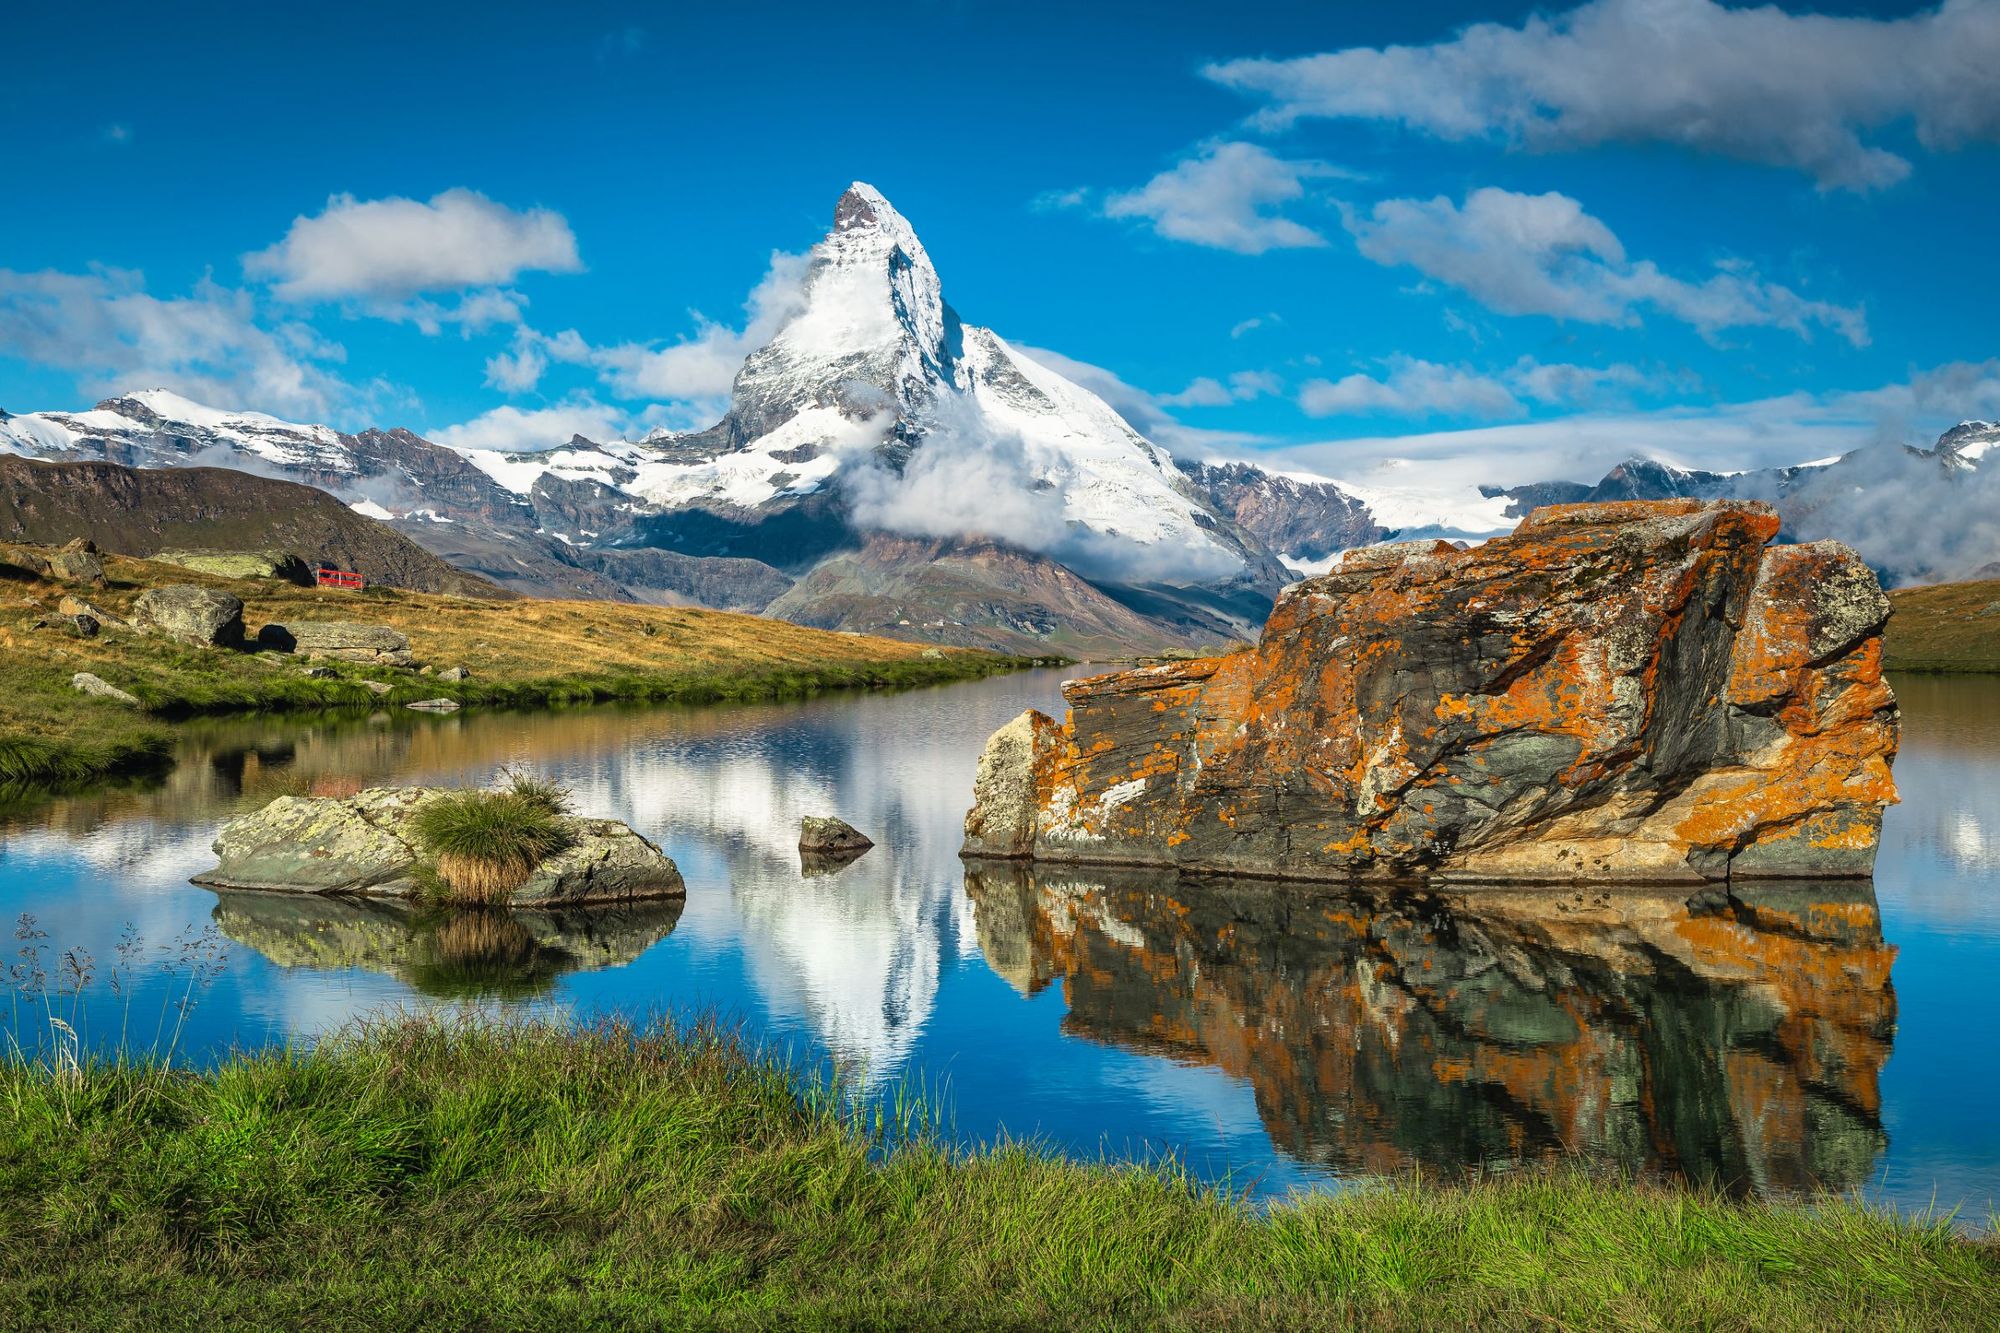 This remarkable image was taken at Stellisee Lake, where the mountain reflects back in the water. Photo: Getty